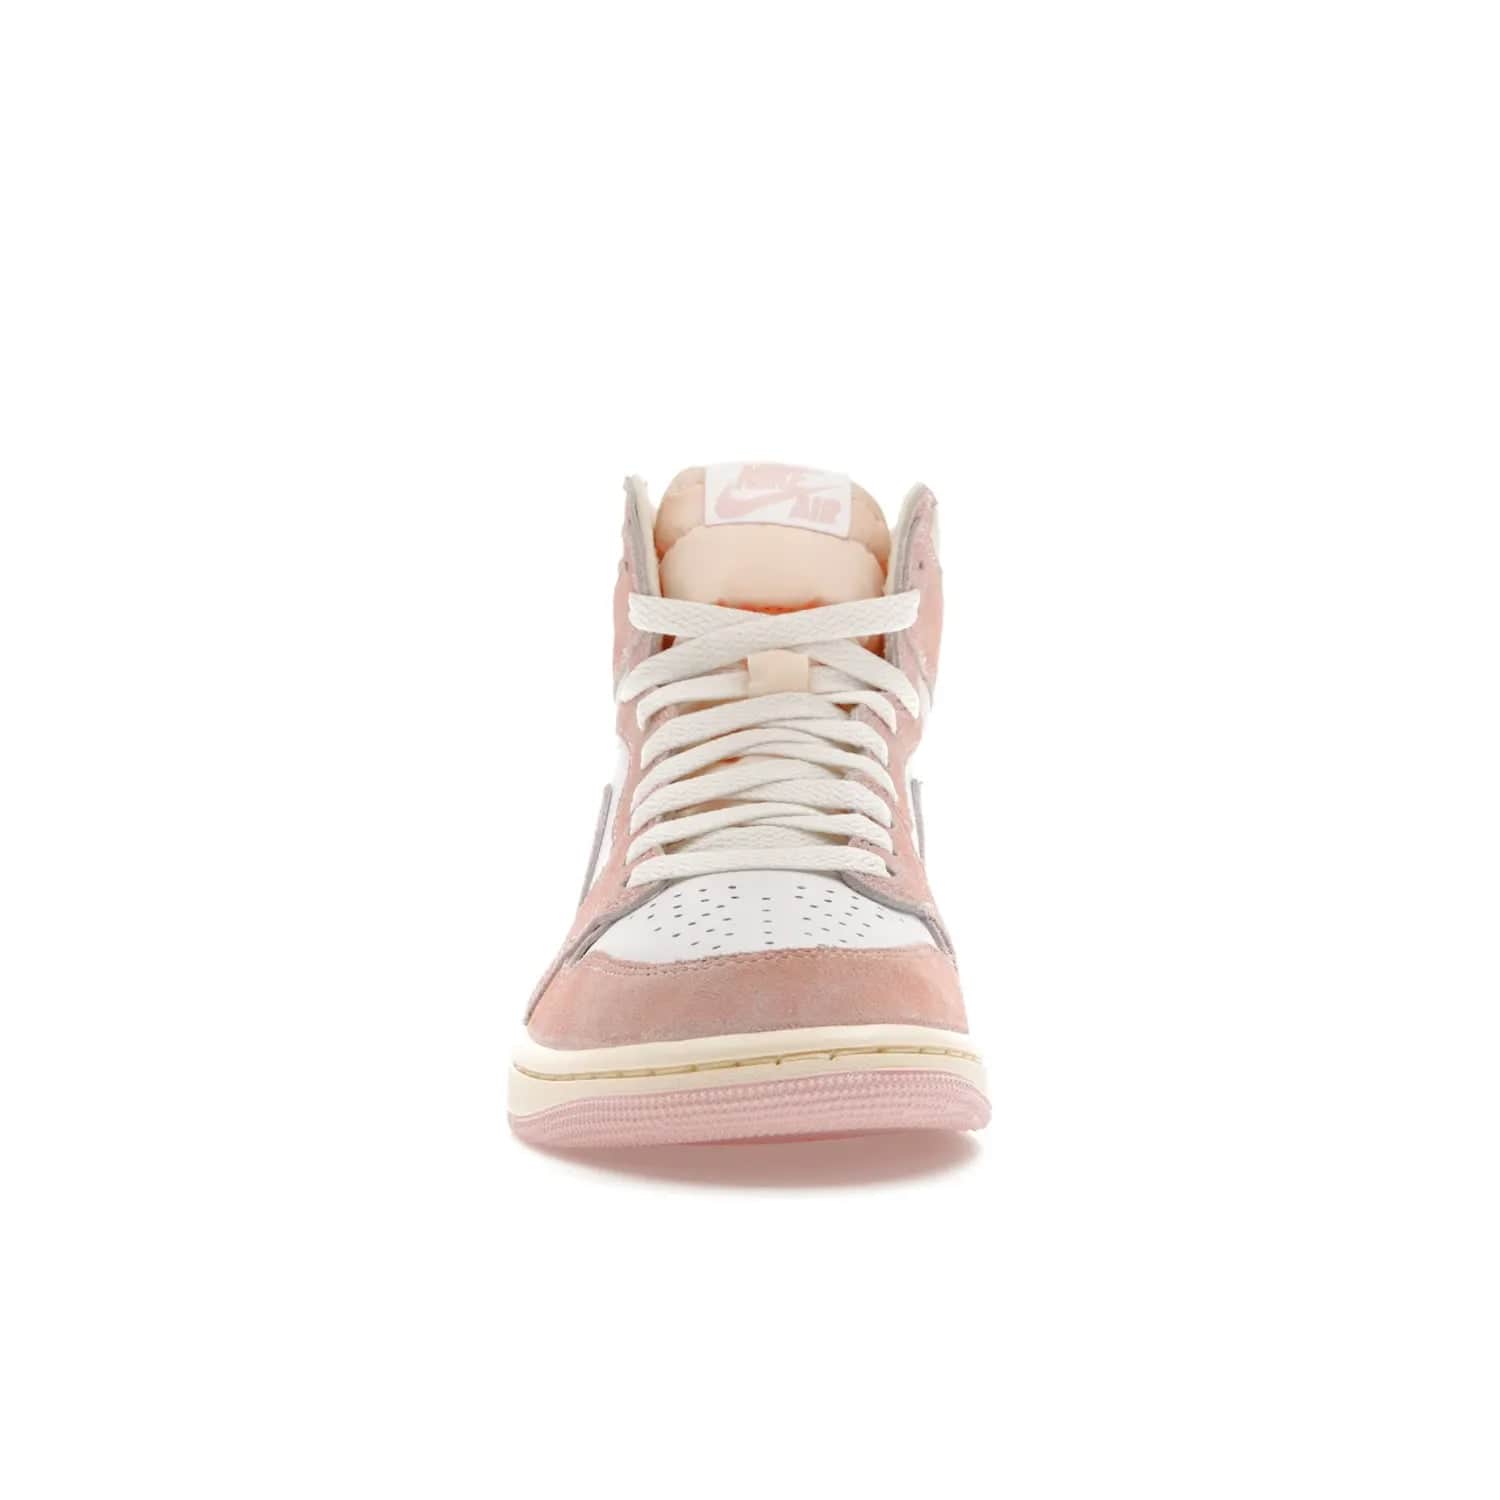 Jordan 1 Retro High OG Washed Pink (Women's) - Image 10 - Only at www.BallersClubKickz.com - Iconic Air Jordan 1 Retro High OG for women with unique pink suede and white leather uppers. Get the timeless look on April 22, 2023.